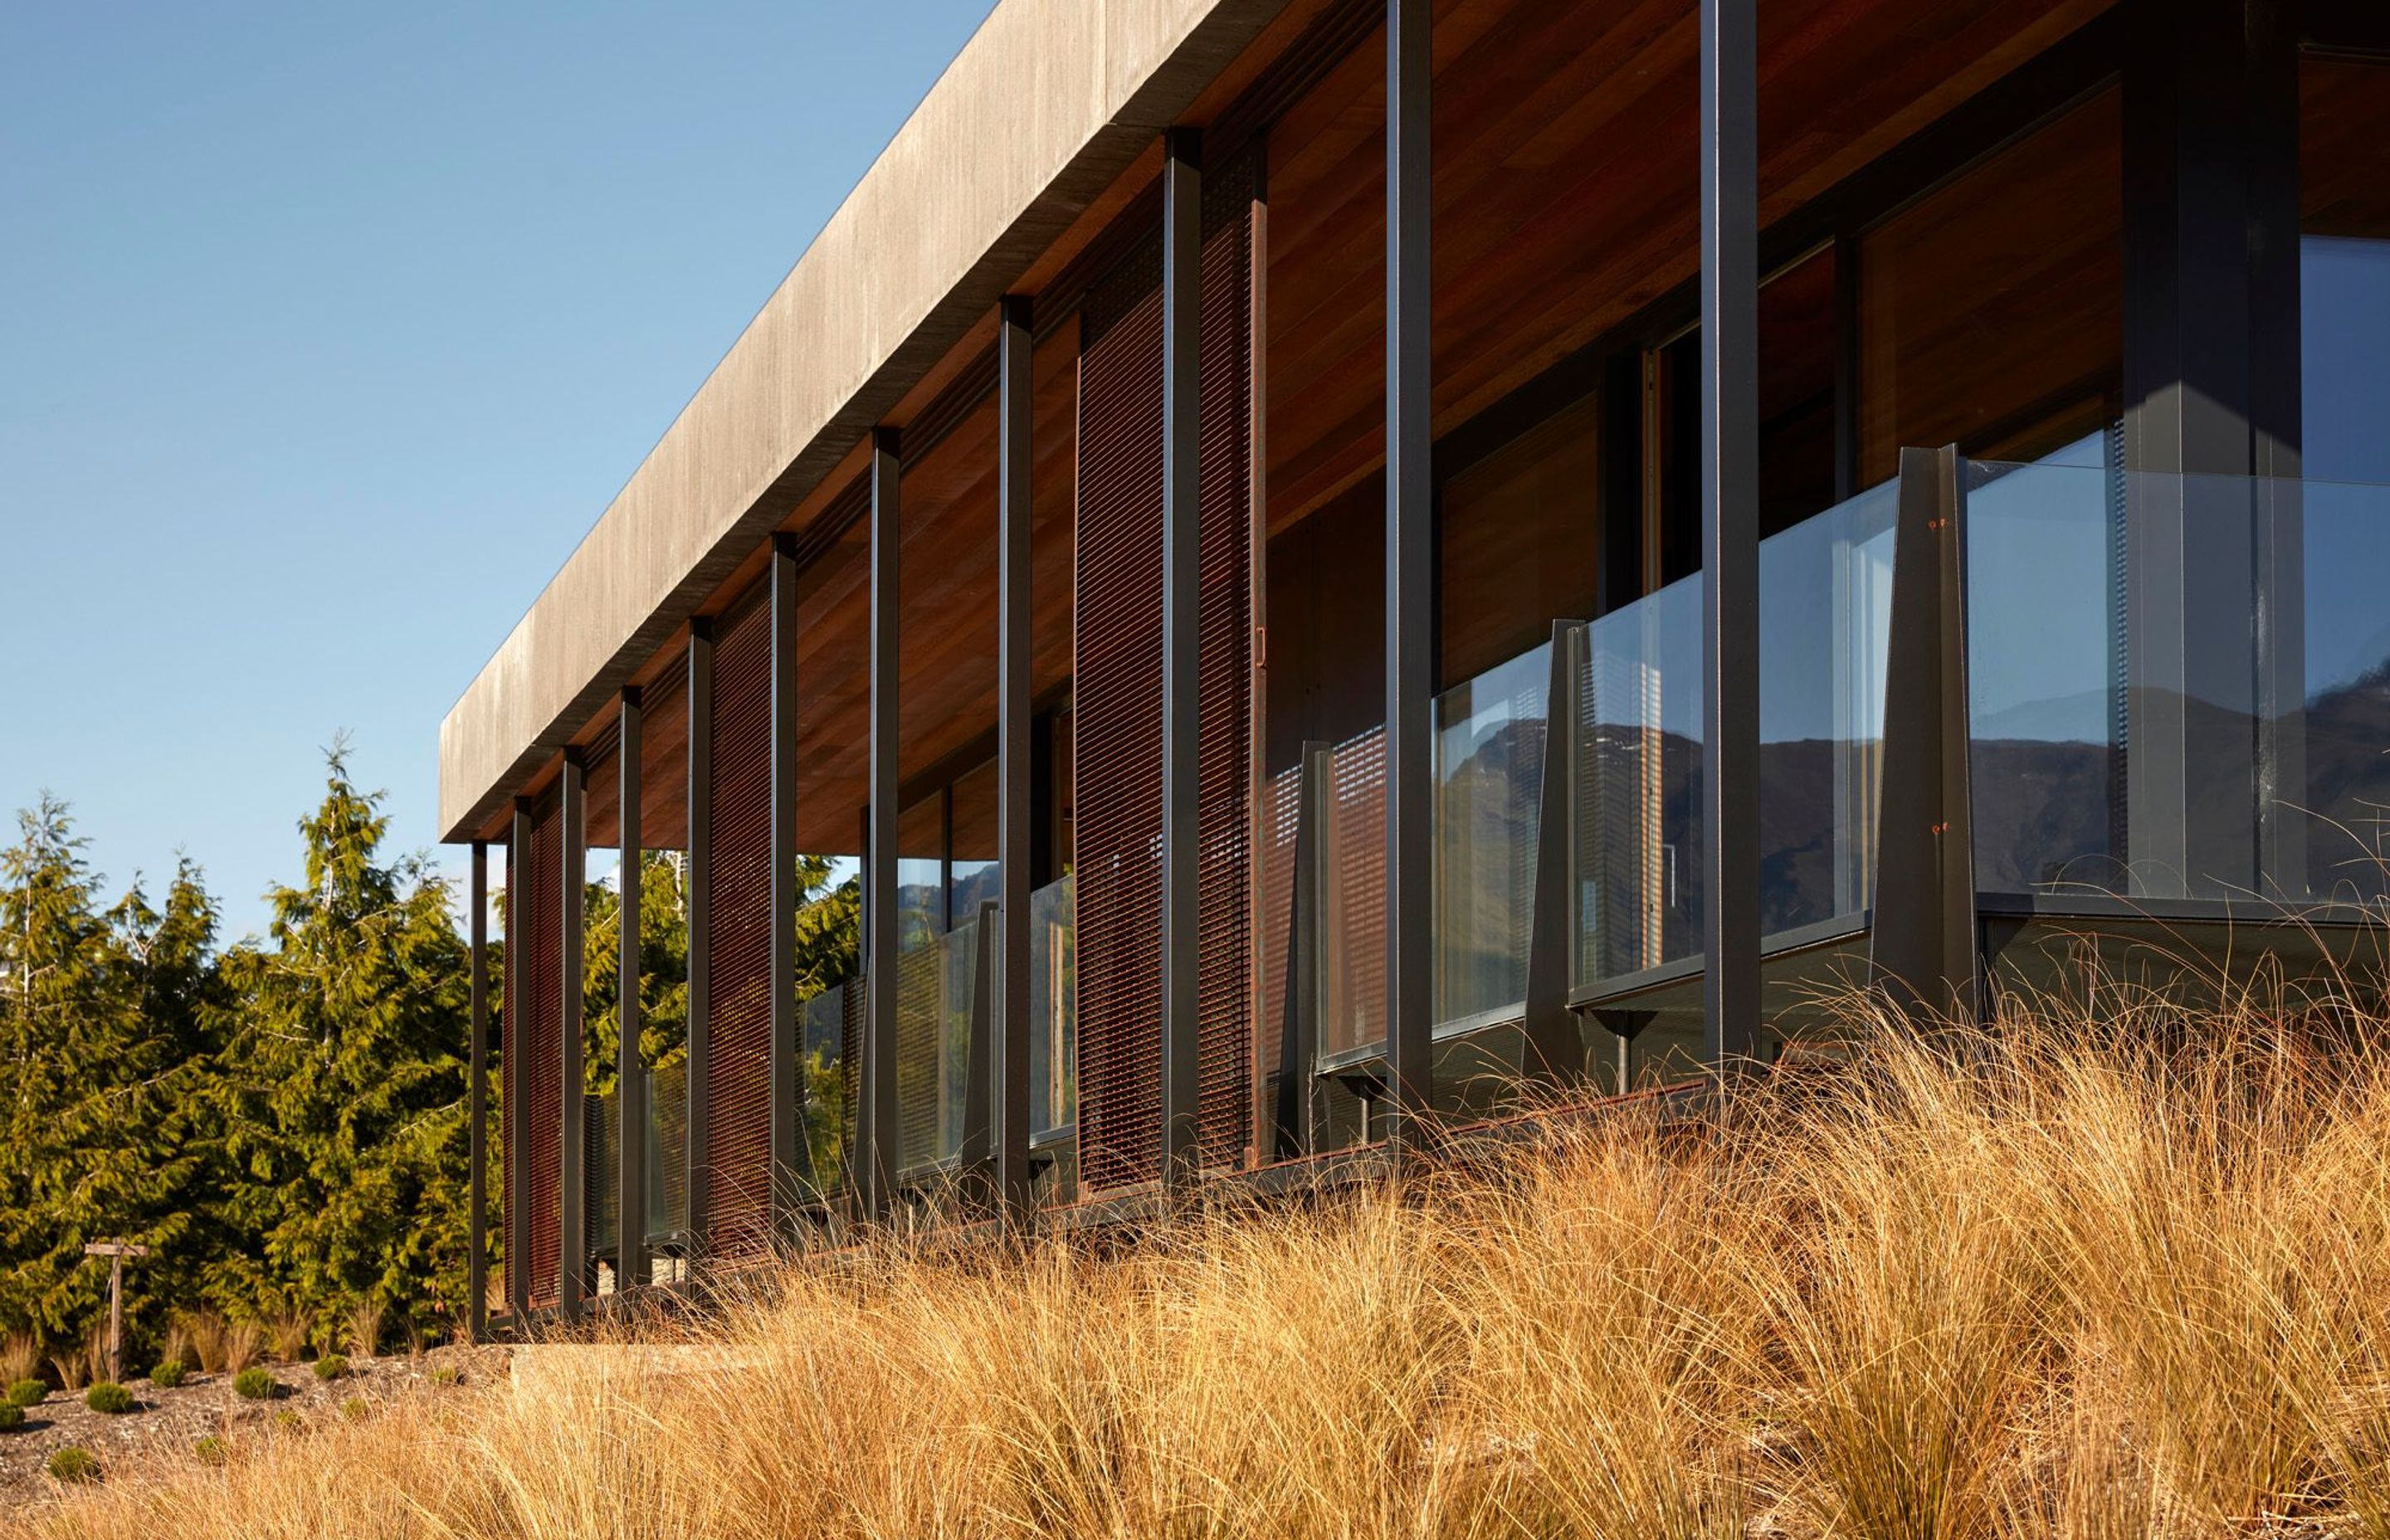 The veranda/walkway on the front elevation provides protection from central Otago's hot summers and cold winters.